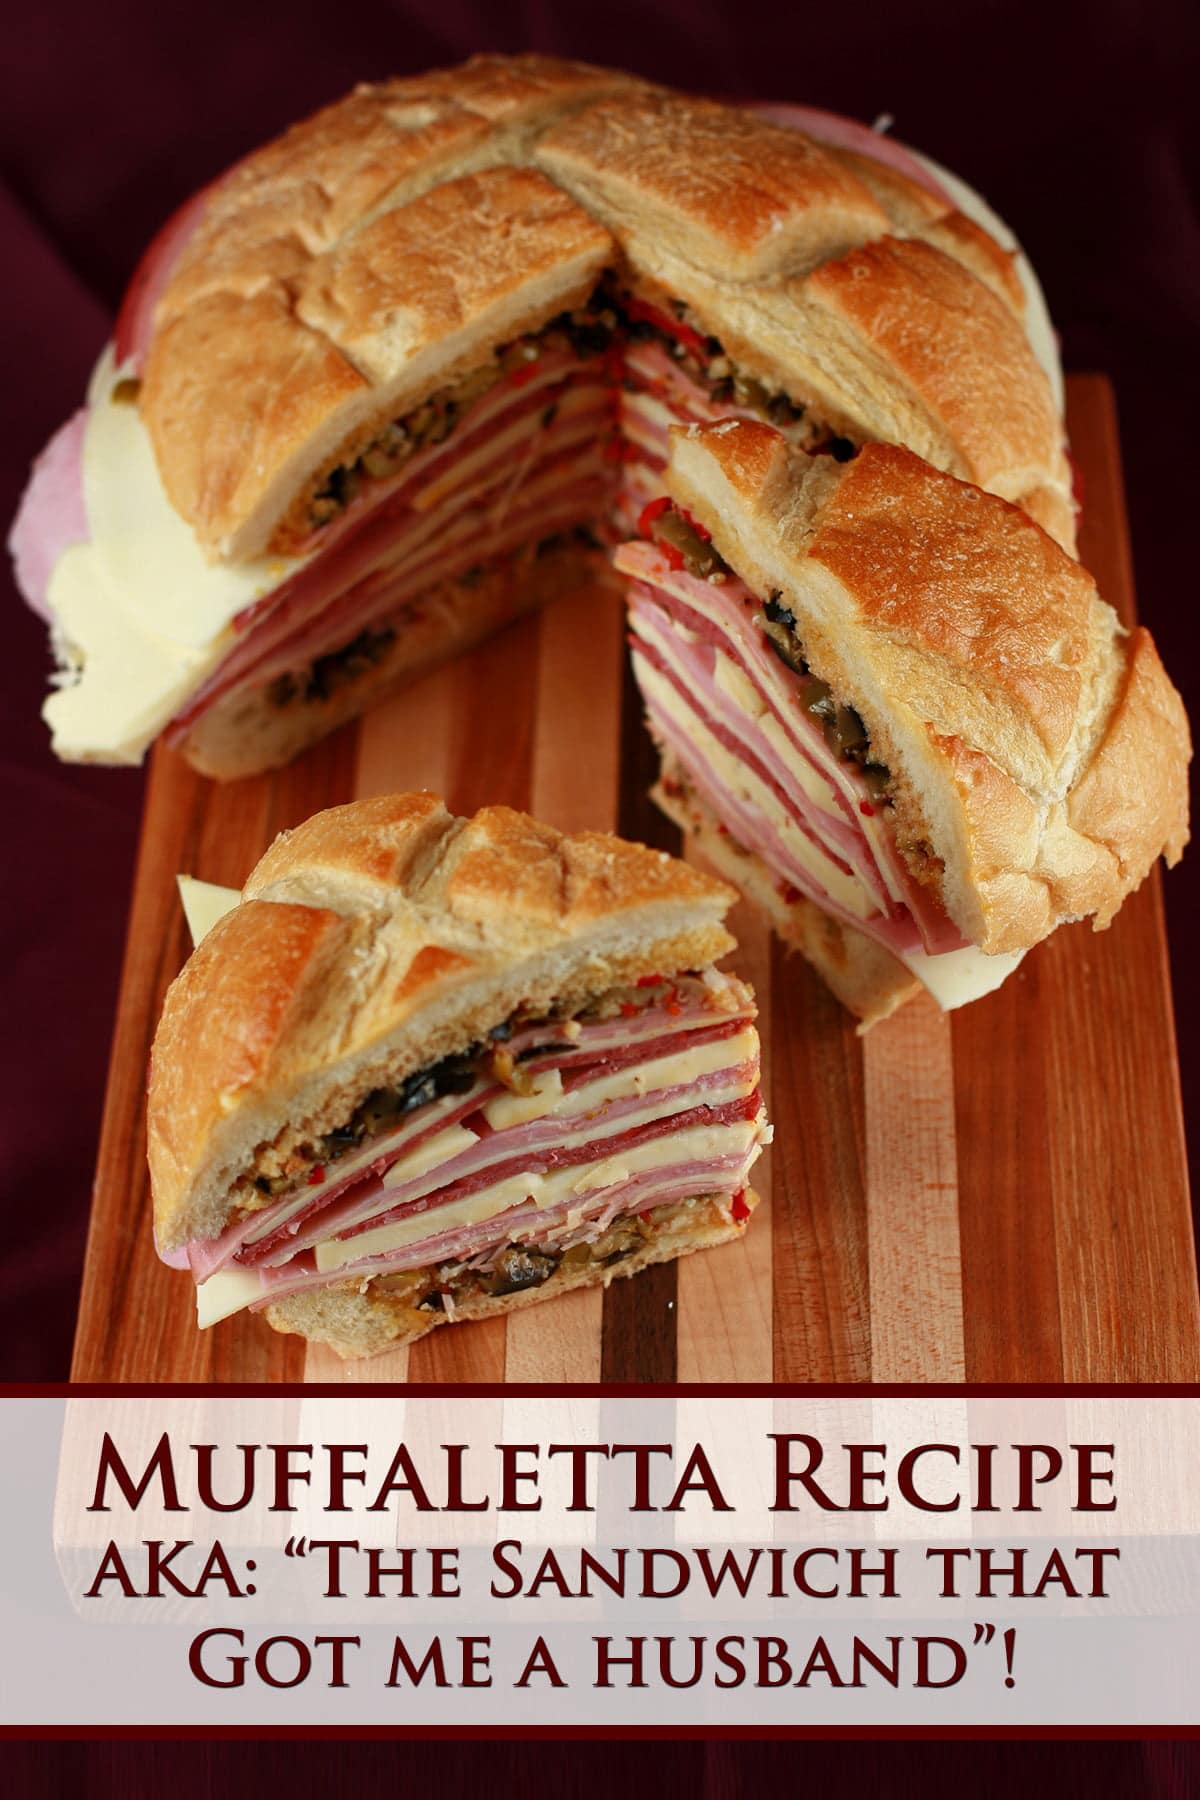 A large muffaletta sandwich: A full loaf of bread, stuffed with many layers of meats, cheeses, and olive salad.